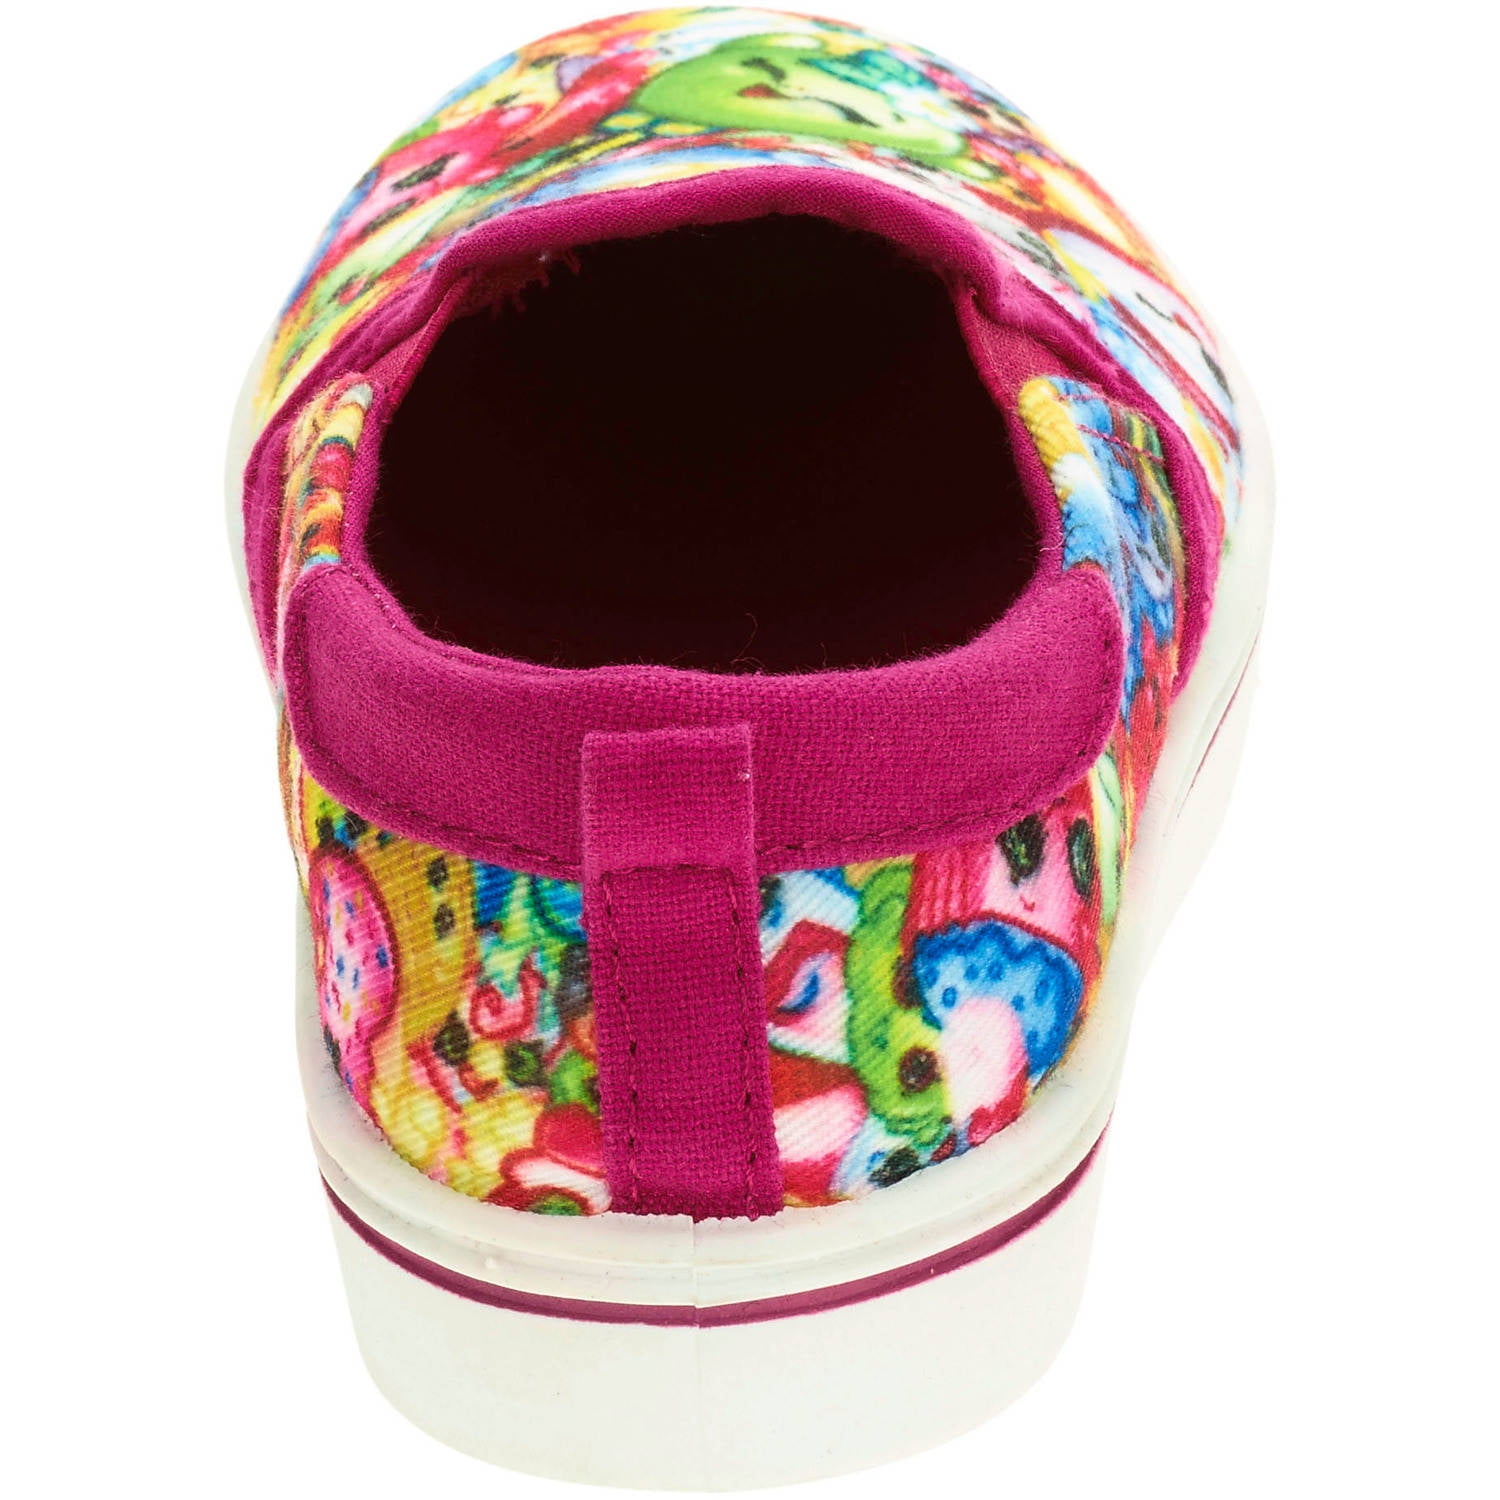 Shopkins Girl's Casual Slip On Shoes Size 3 Pink NWT 